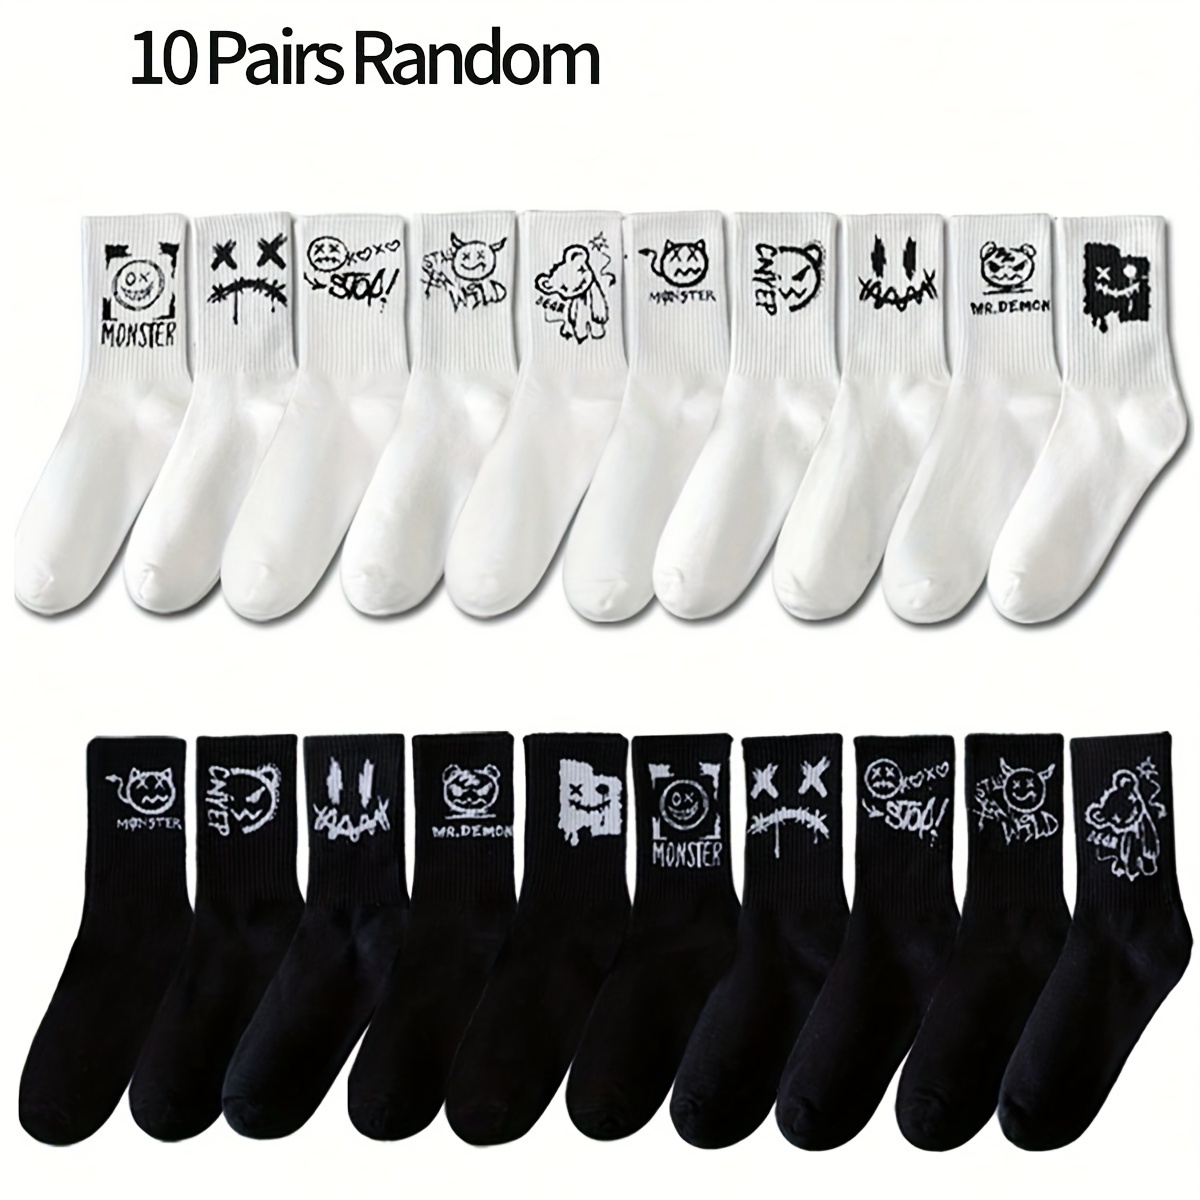 

10 Pairs Of Teenager's Fashion Pattern Crew Socks, Comfy Breathable Socks For Daily Wearing